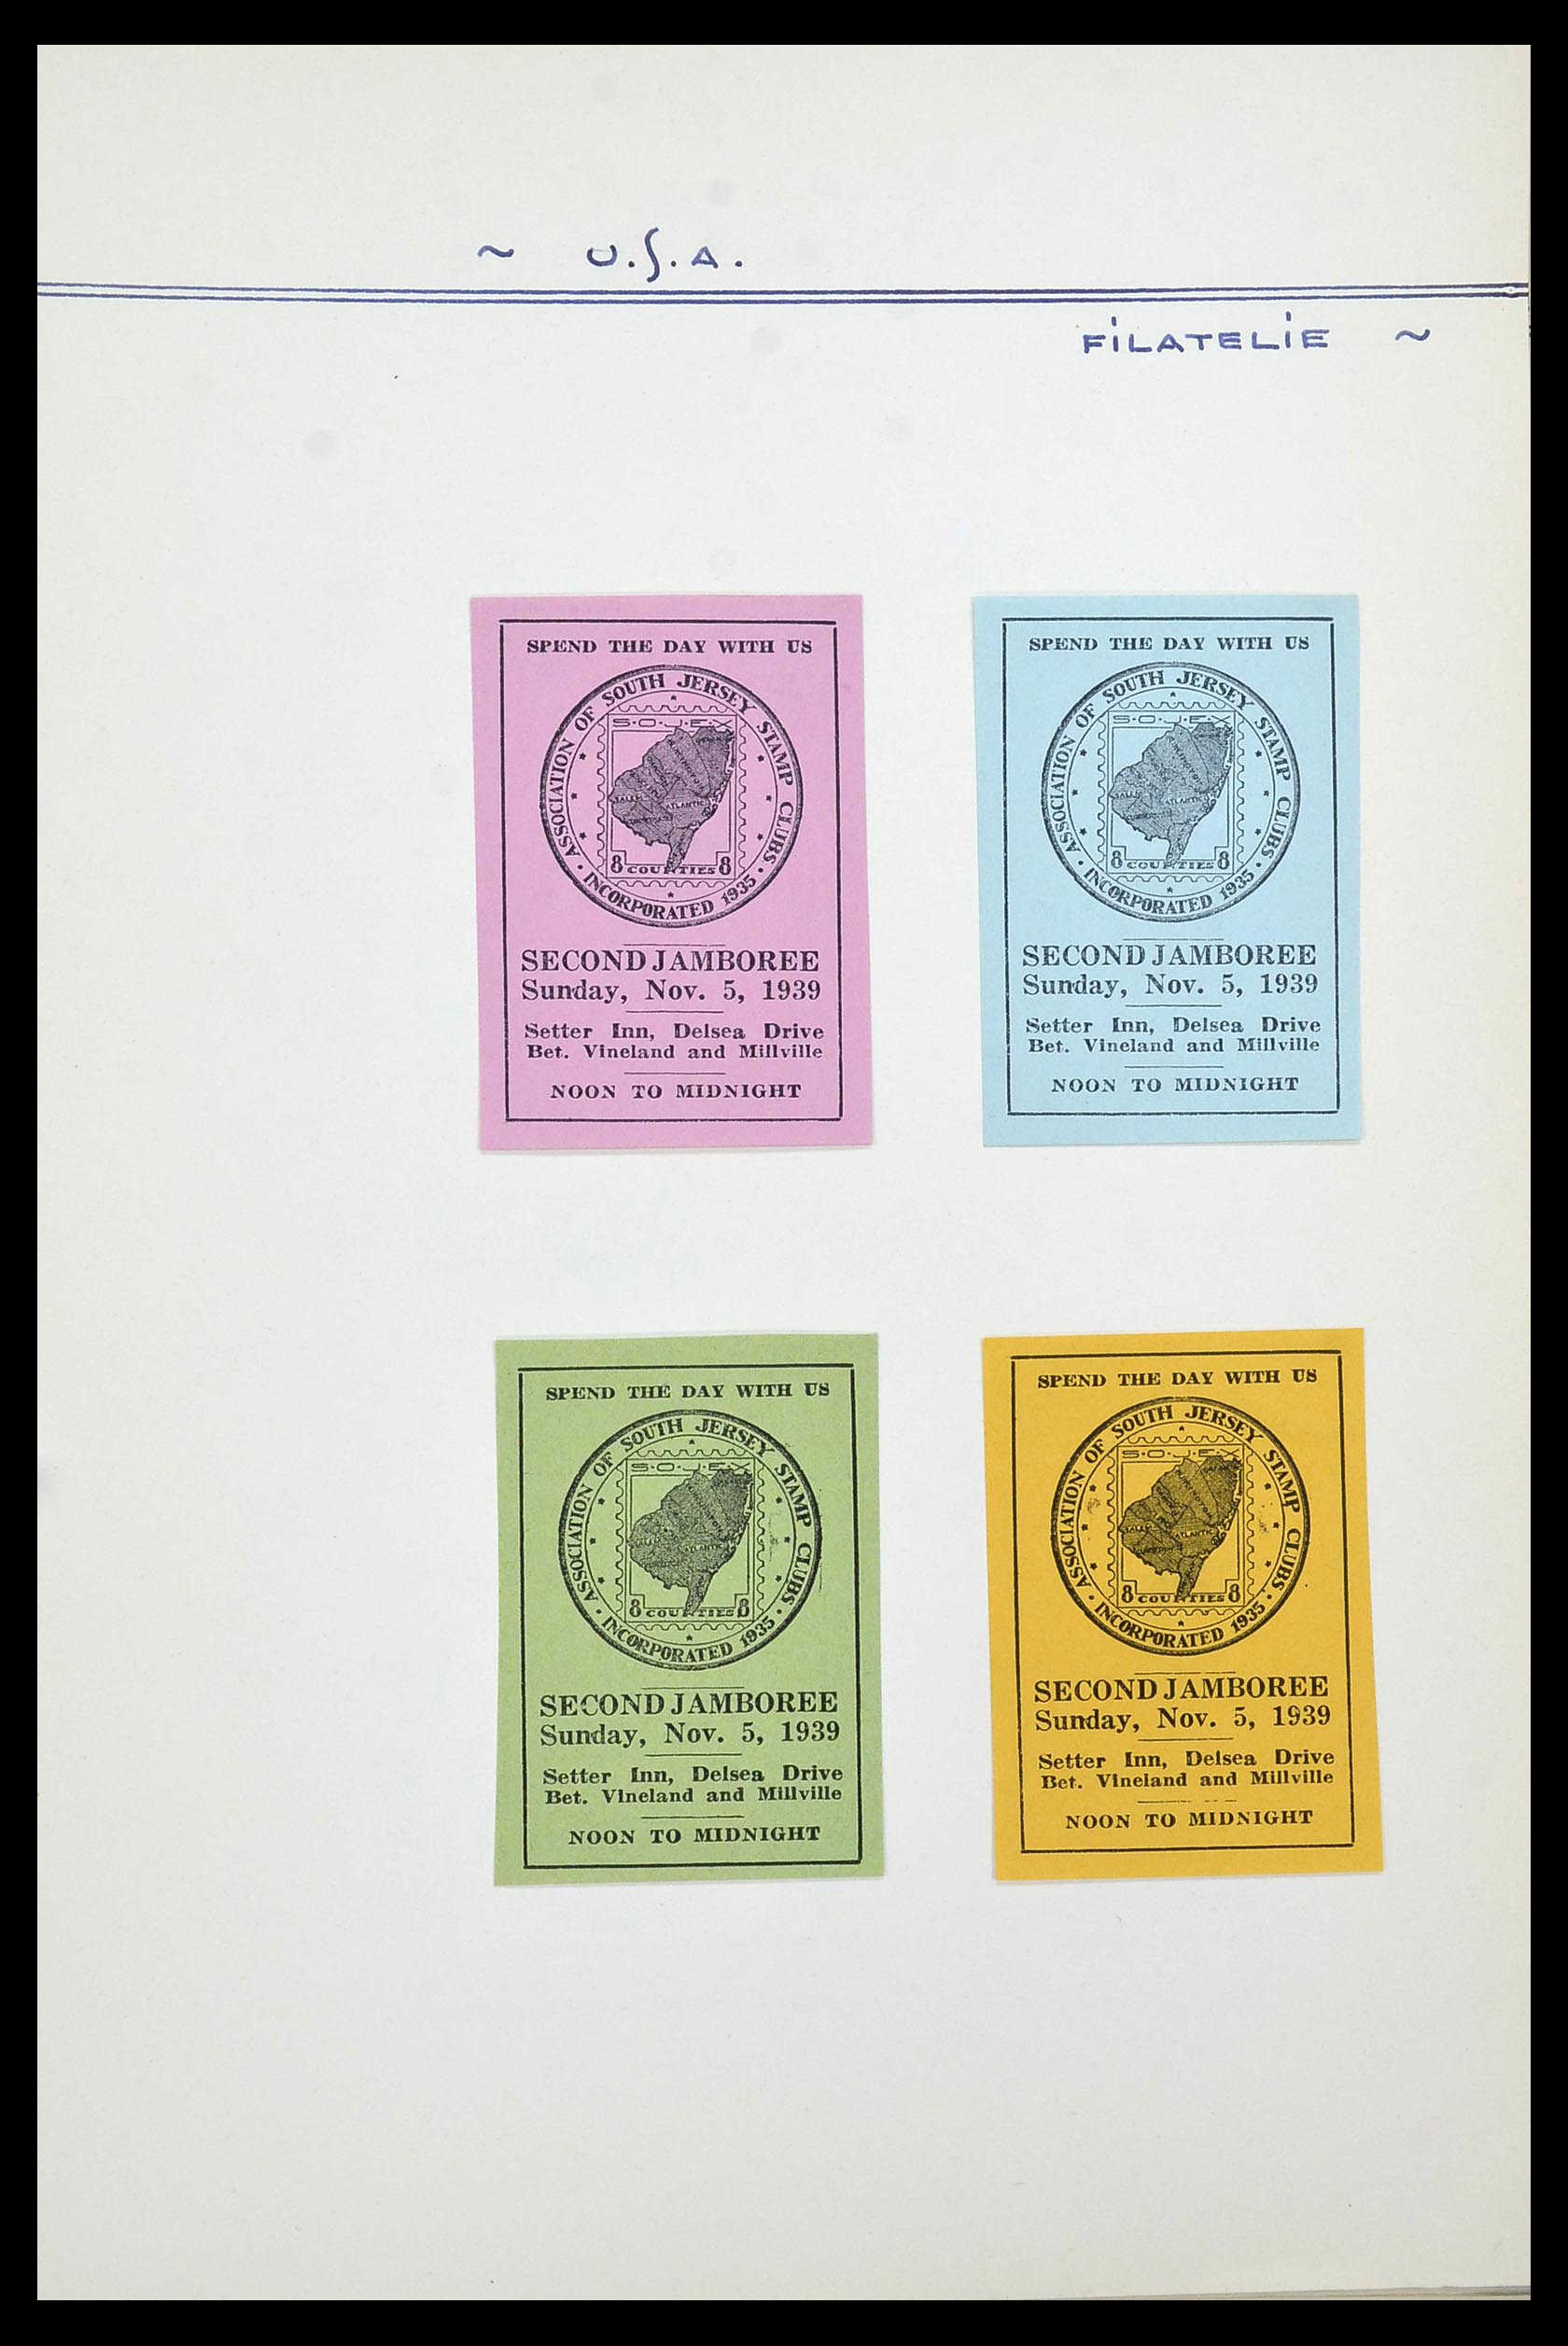 34486 013 - Stamp Collection 34486 USA philatelic labels 1926-1960.